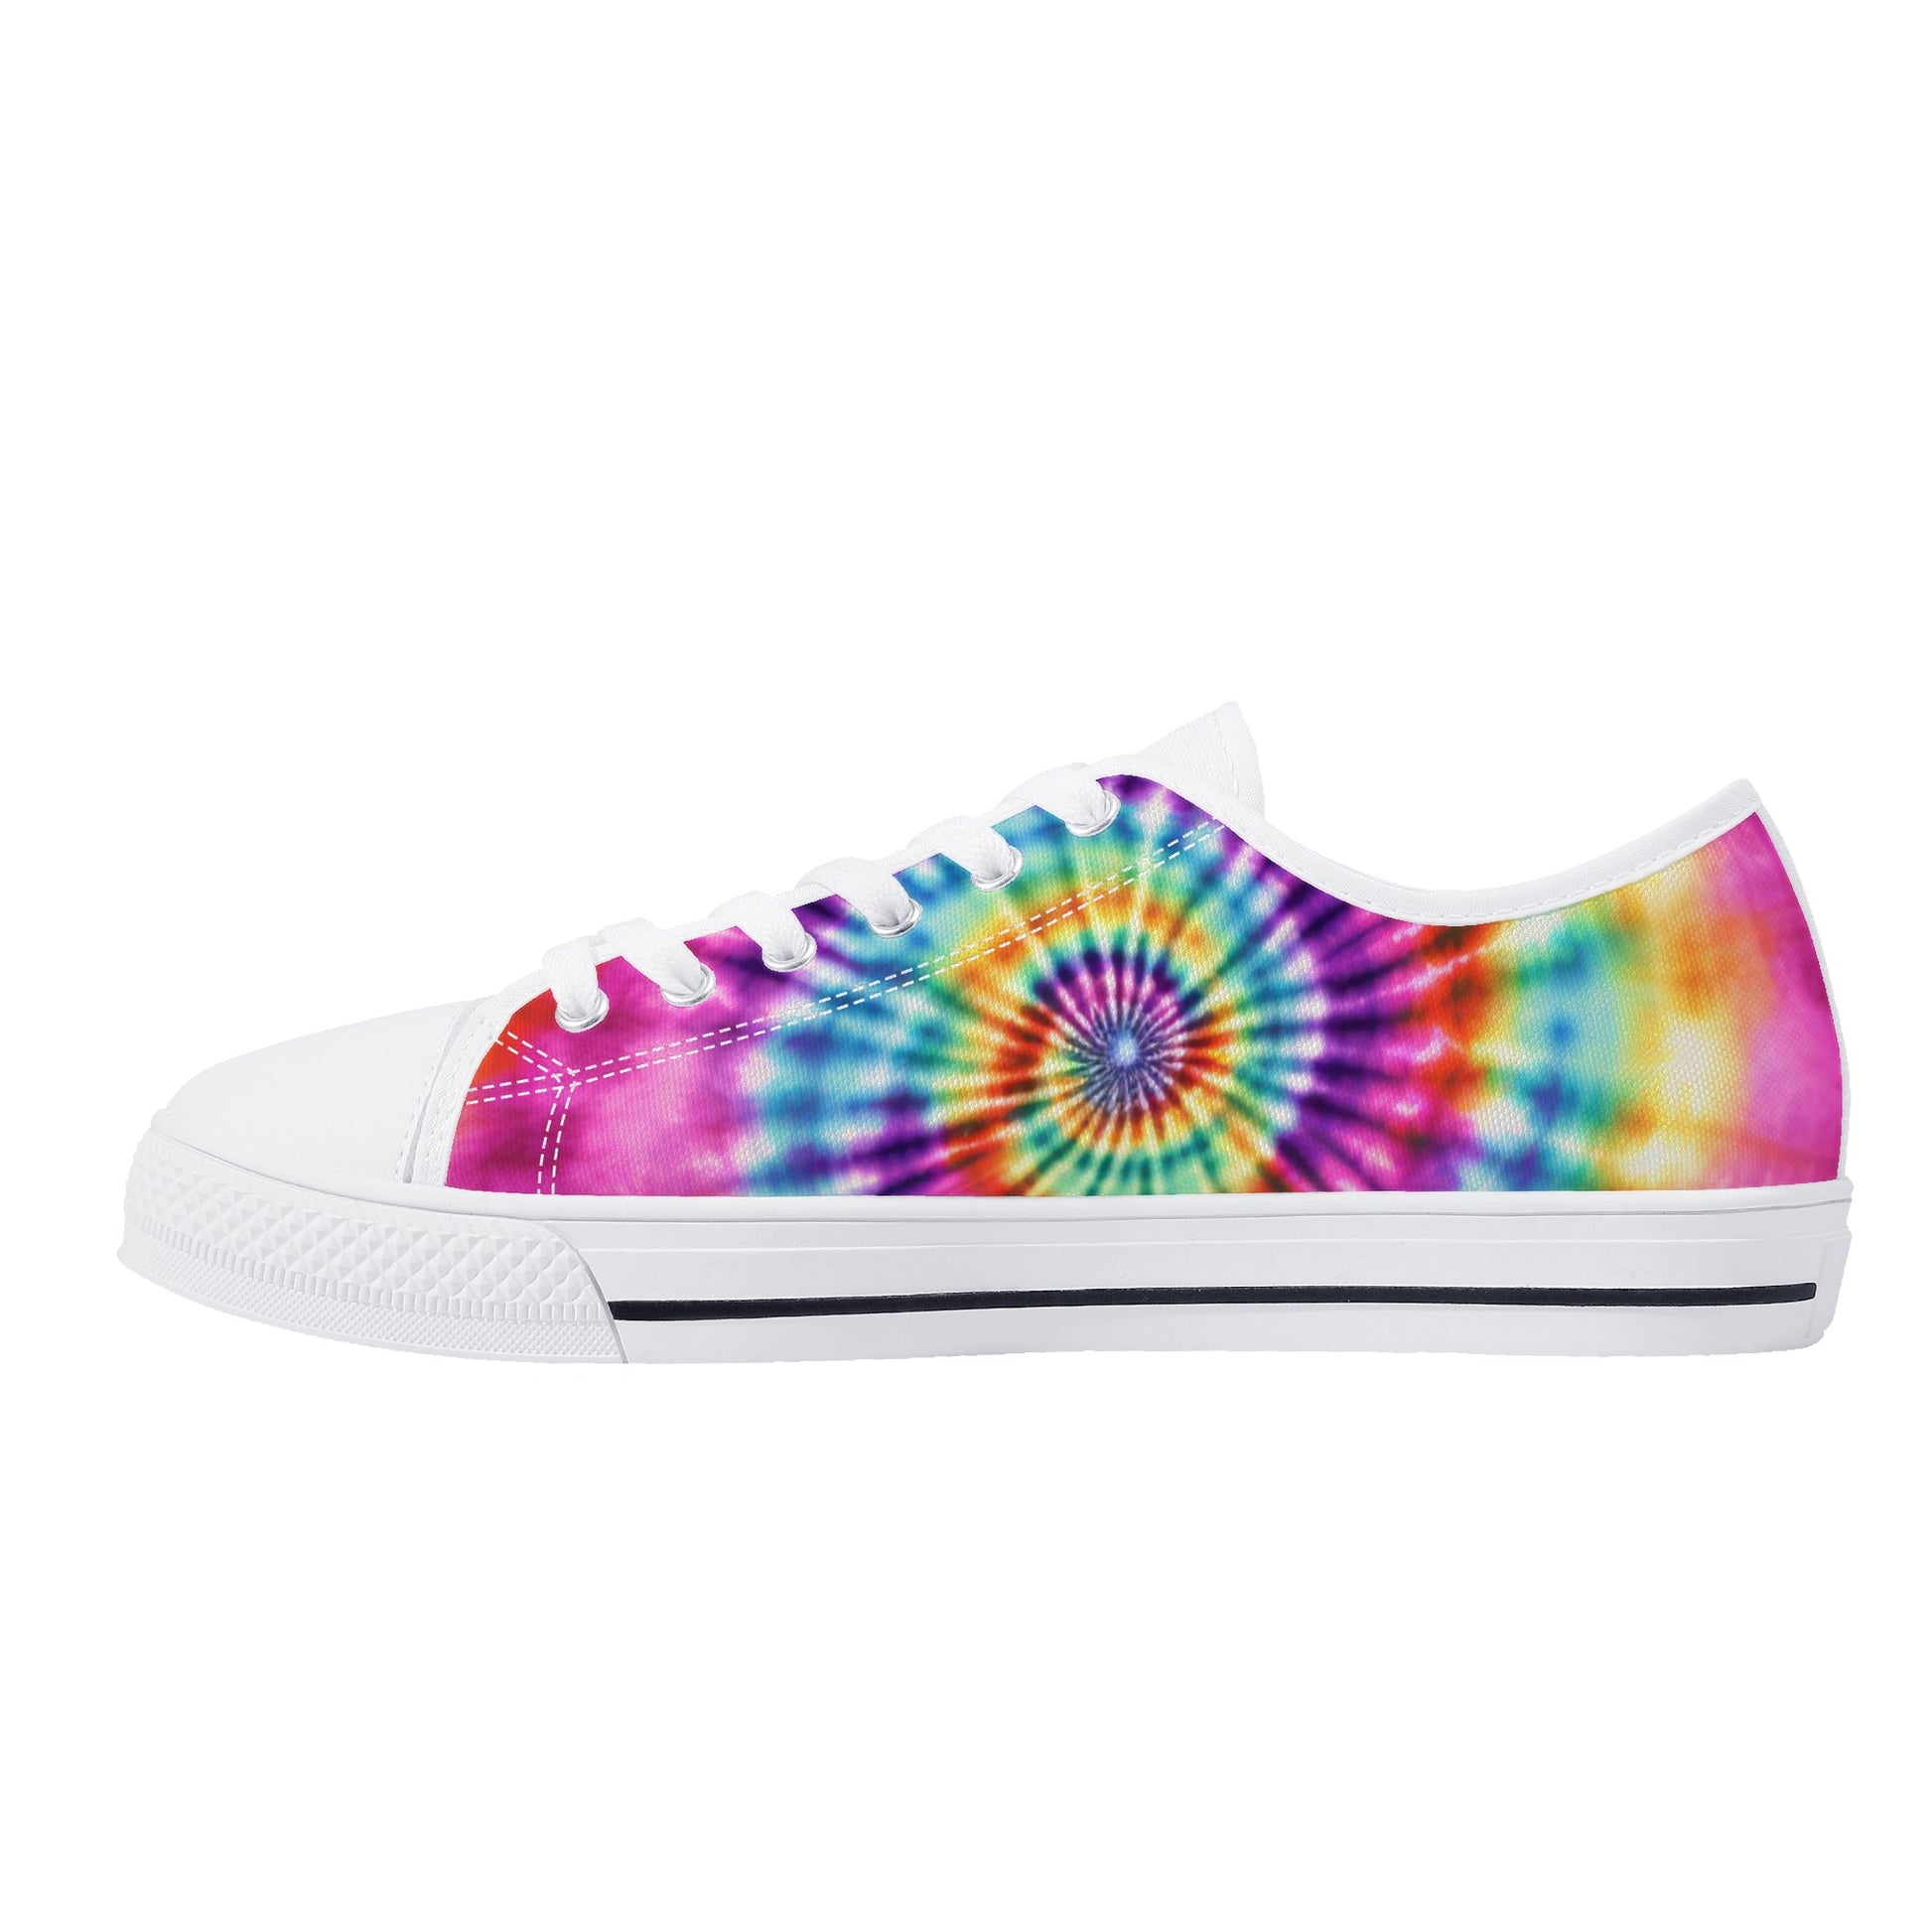 Tie Dye Women Shoes, Pink Sneakers Canvas White Black Low Top Lace Up Custom Girls Aesthetic Flat Shoes Starcove Fashion